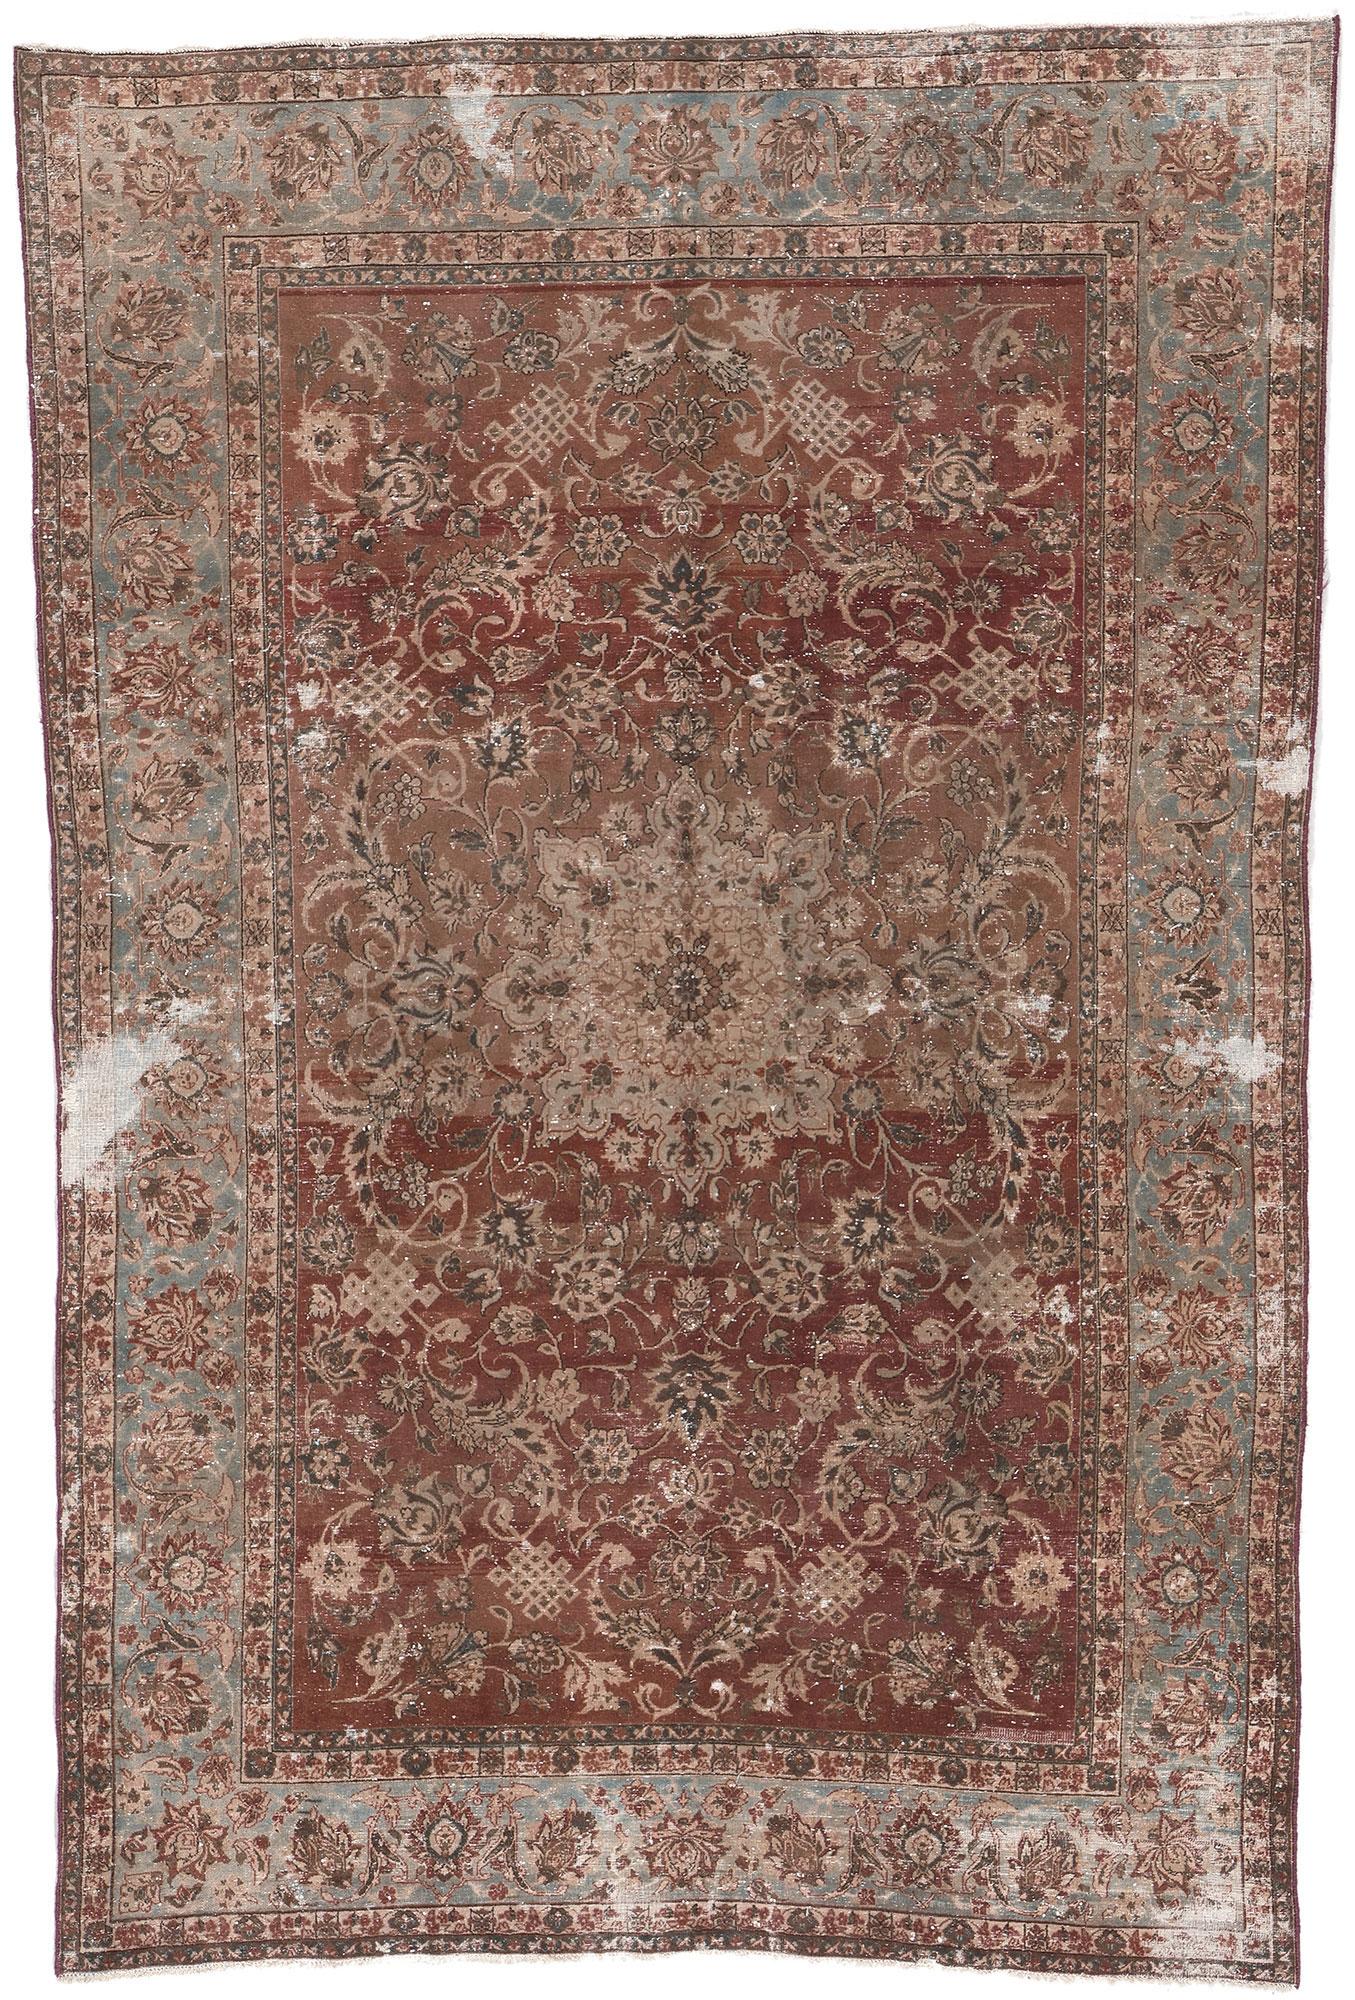 Distressed Antique Persian Tabriz Rug with Rustic Earth-Tone Colors